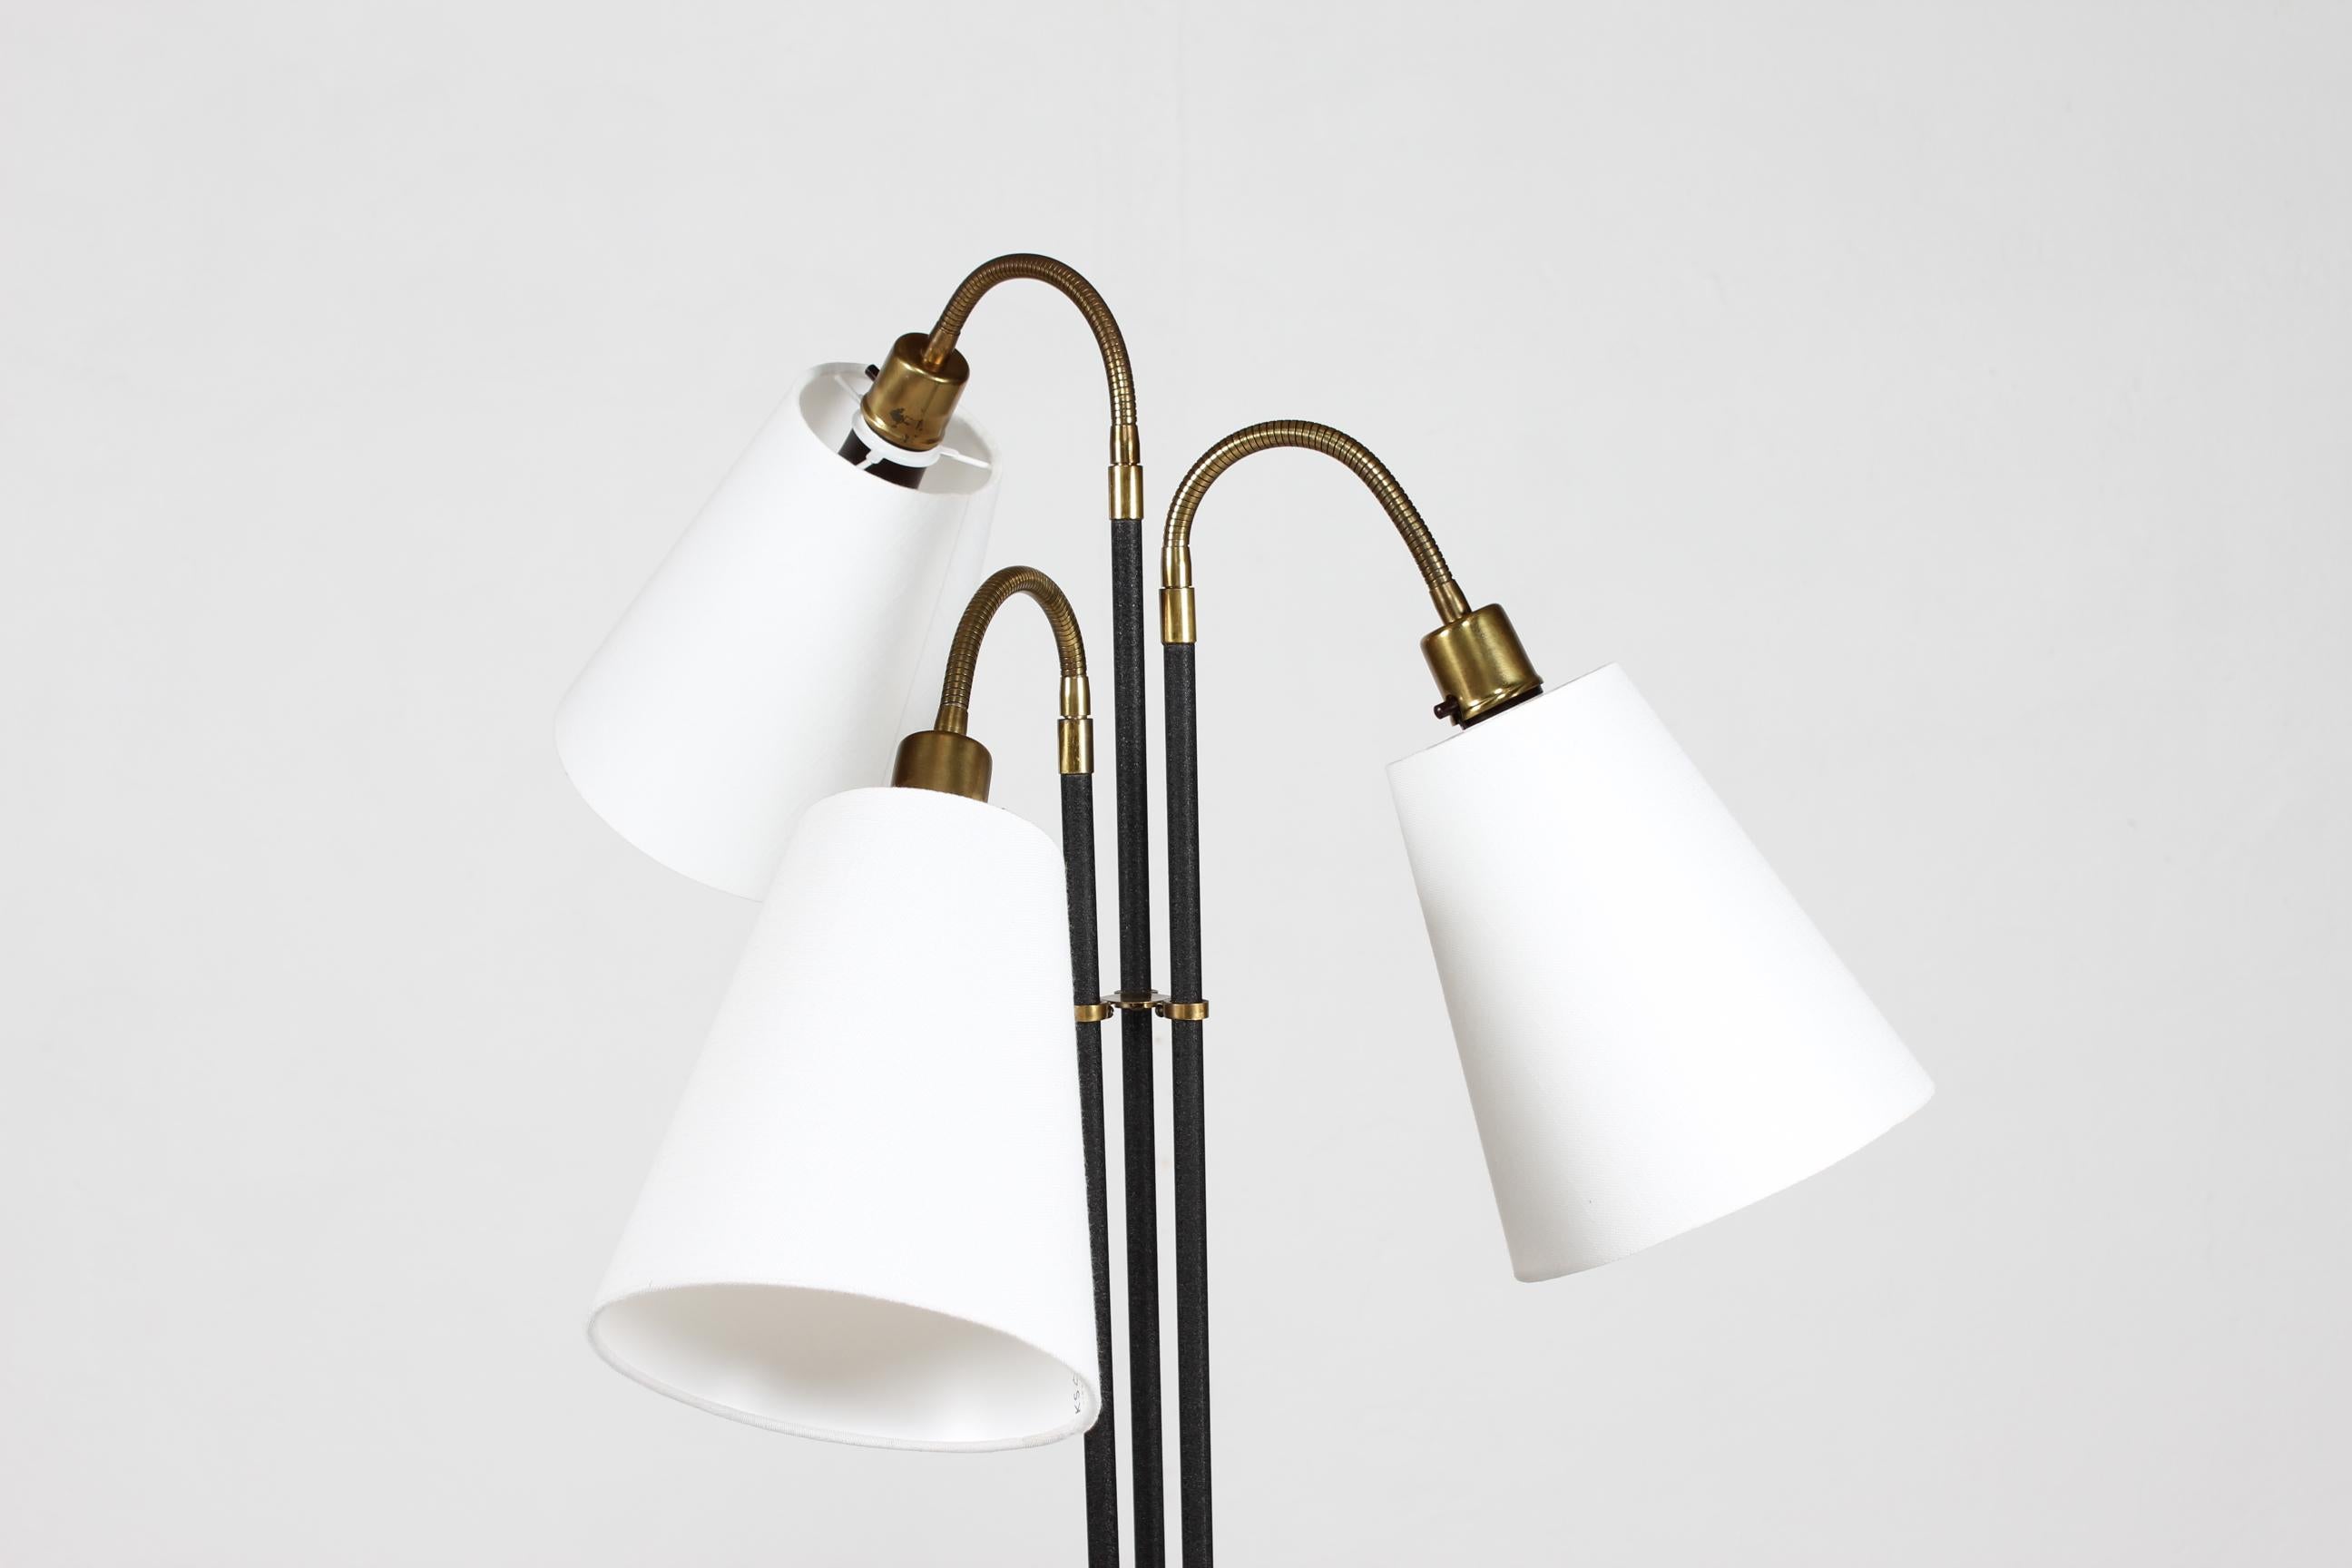 Josef Frank style three-armed floor lamp made of brass and metal with black lacquer with a little structure.
The three arms are individually adjustable and flexible, mounted with new shades.

This floor lamp is made by a Danish lamp manufacturer in